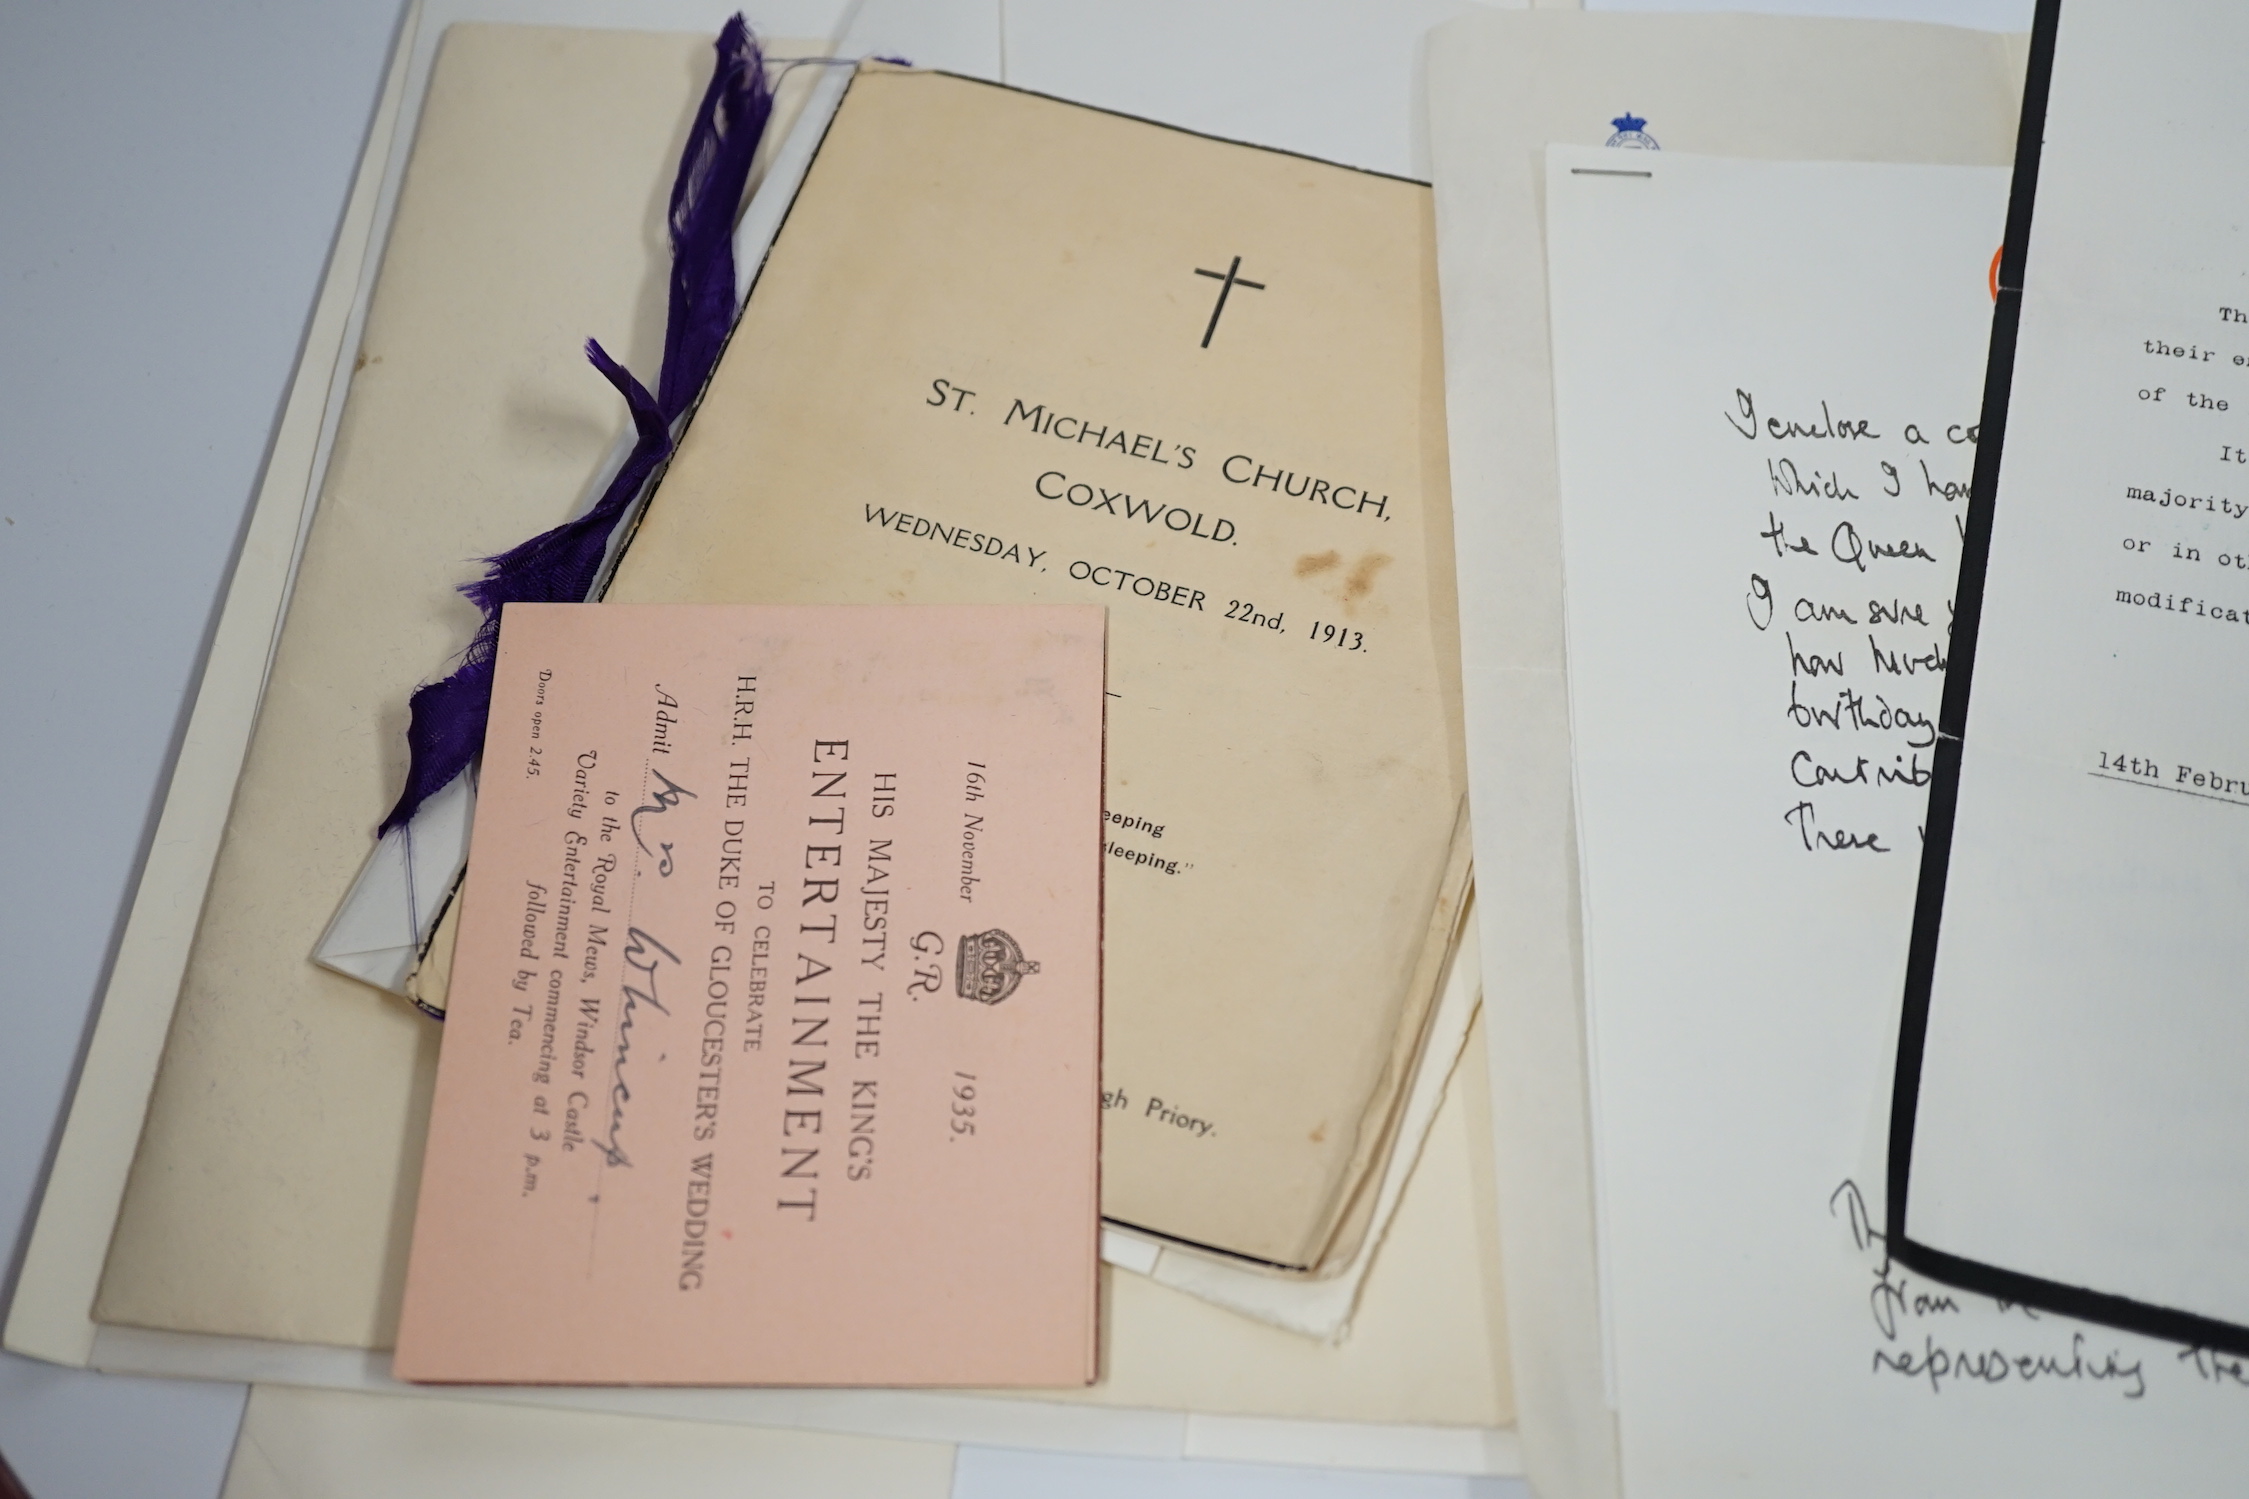 An archive of Royal memorabilia mainly relating to one employee of the Royal Household including; a personal letter from George, Duke of Kent on St. James’ Palace headed notepaper, an original official photocopy of a let